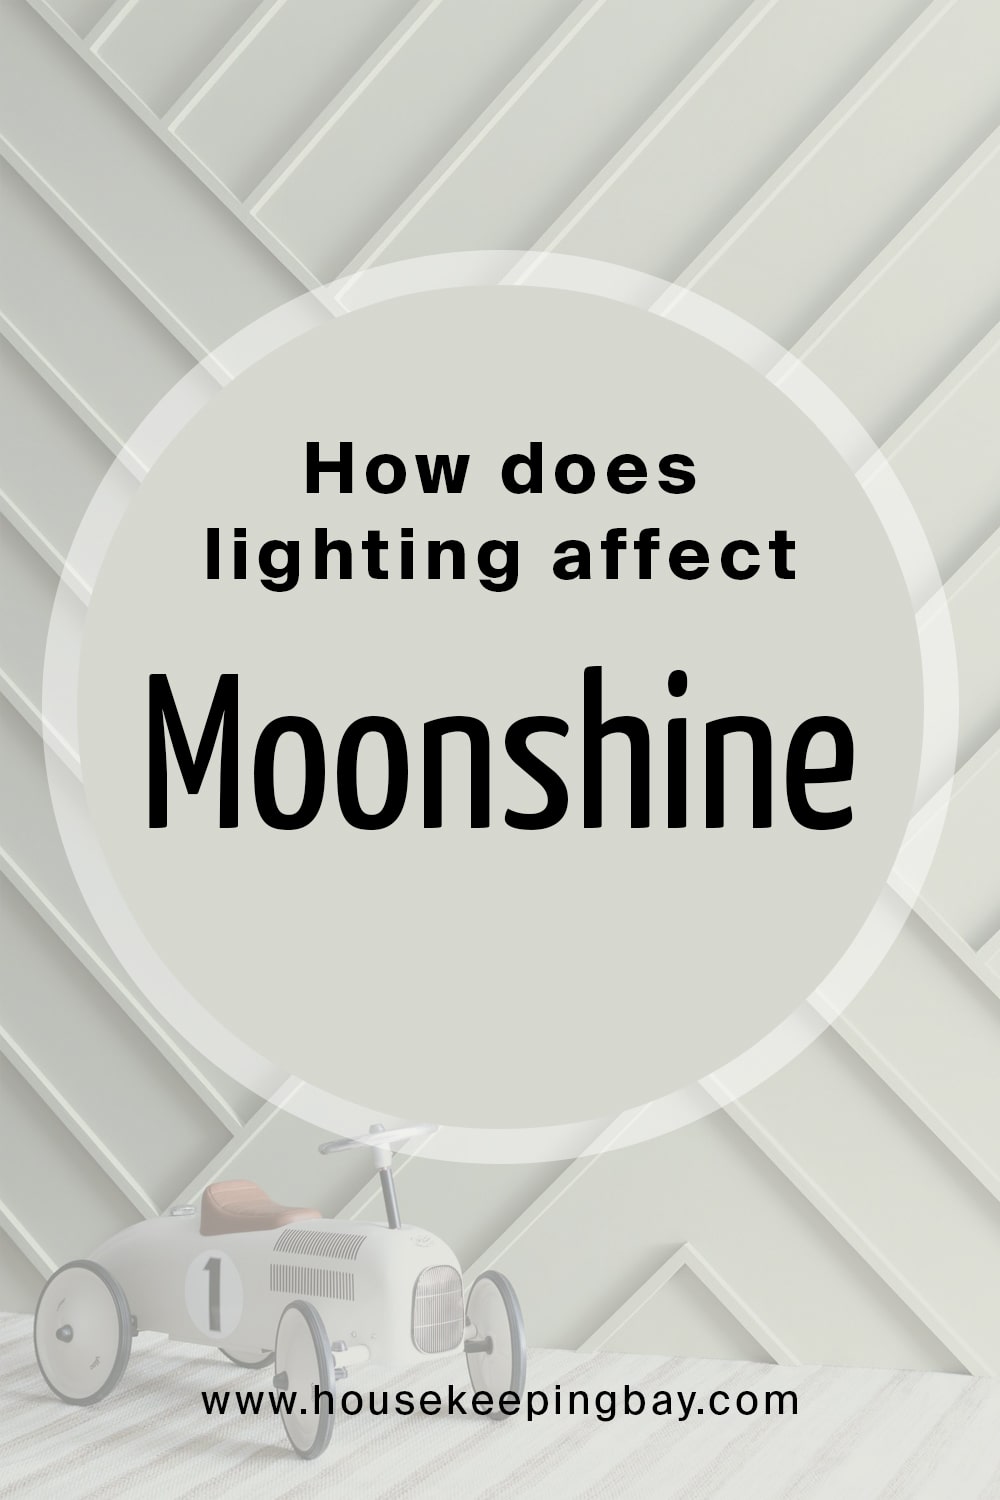 How does lighting affect Moonshine